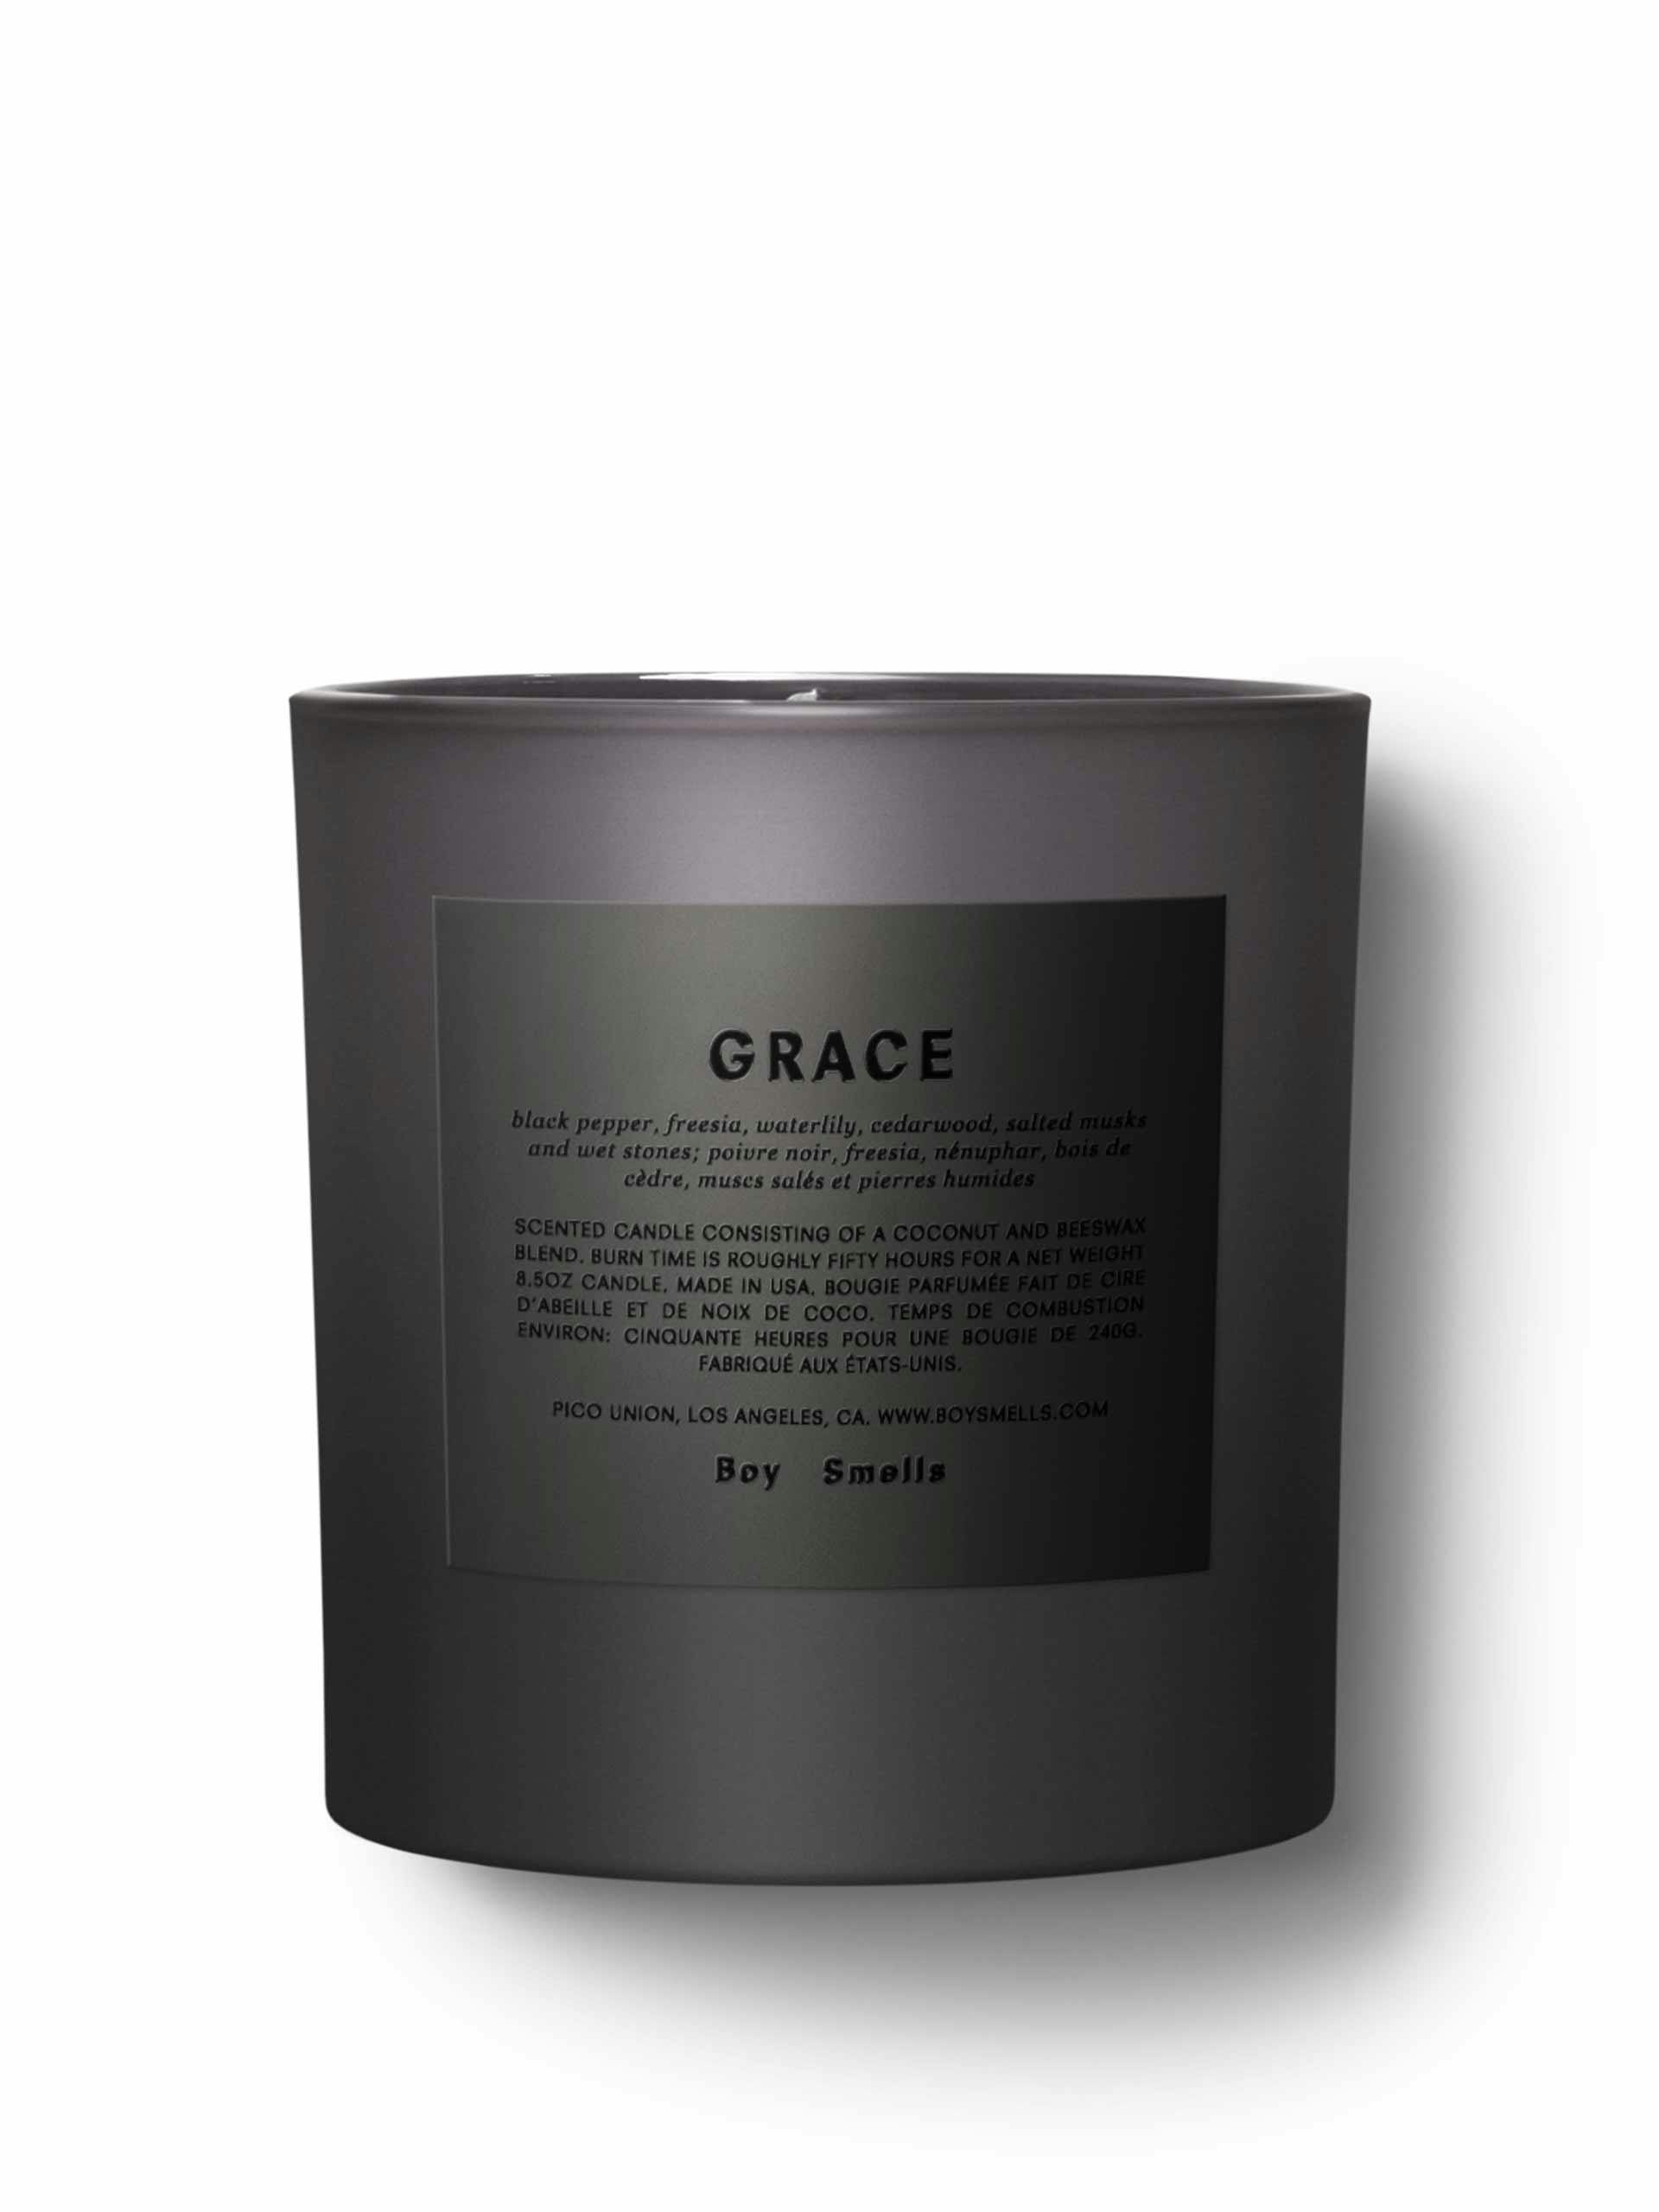 Grace scented candle